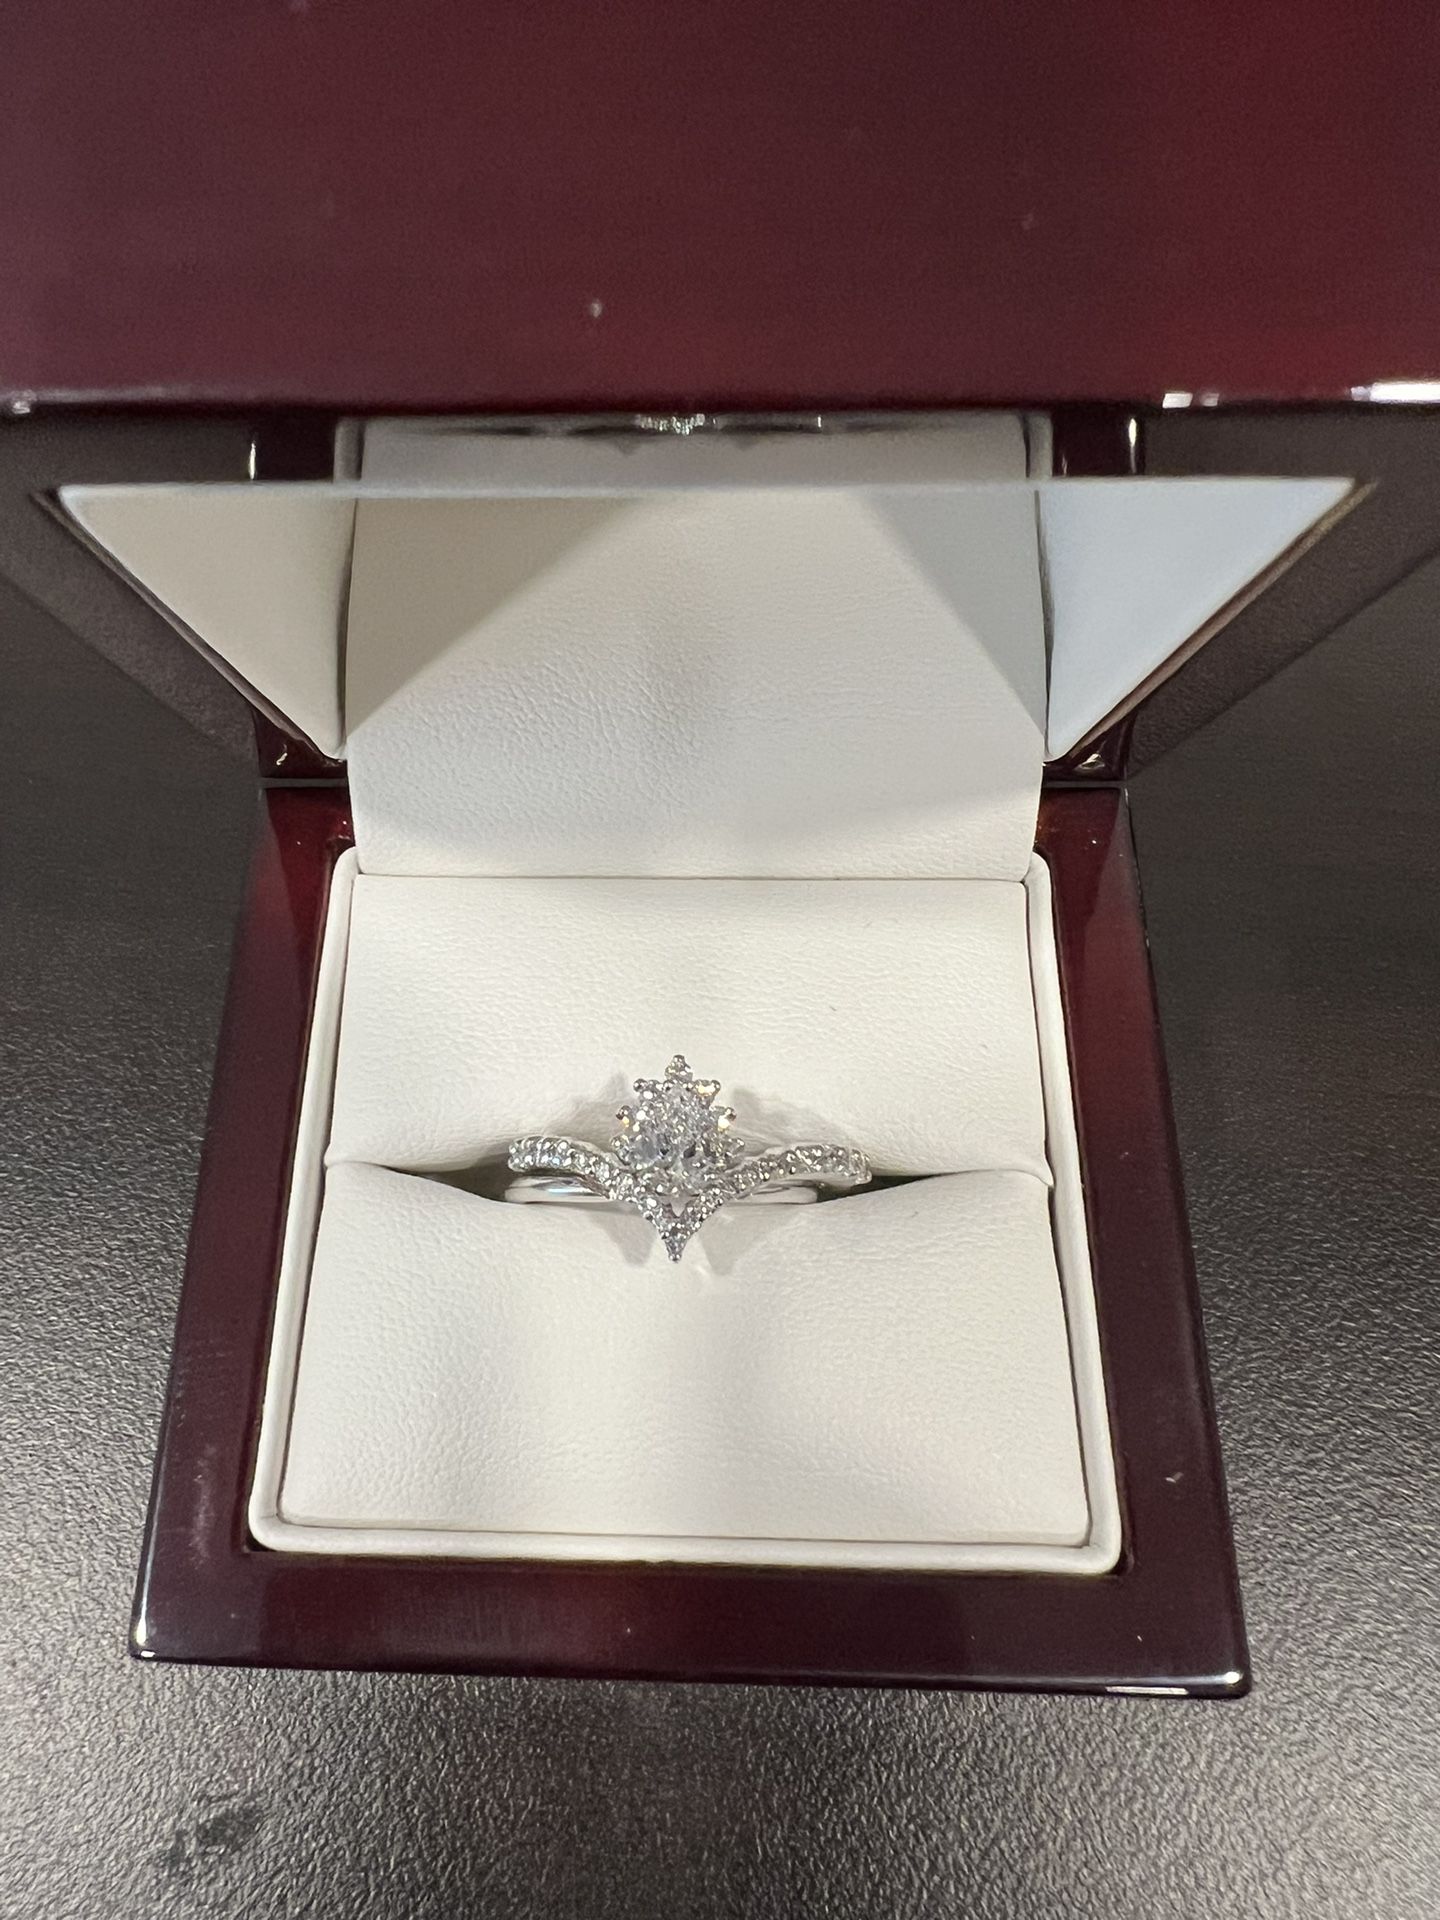 Engagement Ring - Looking For Best Offer